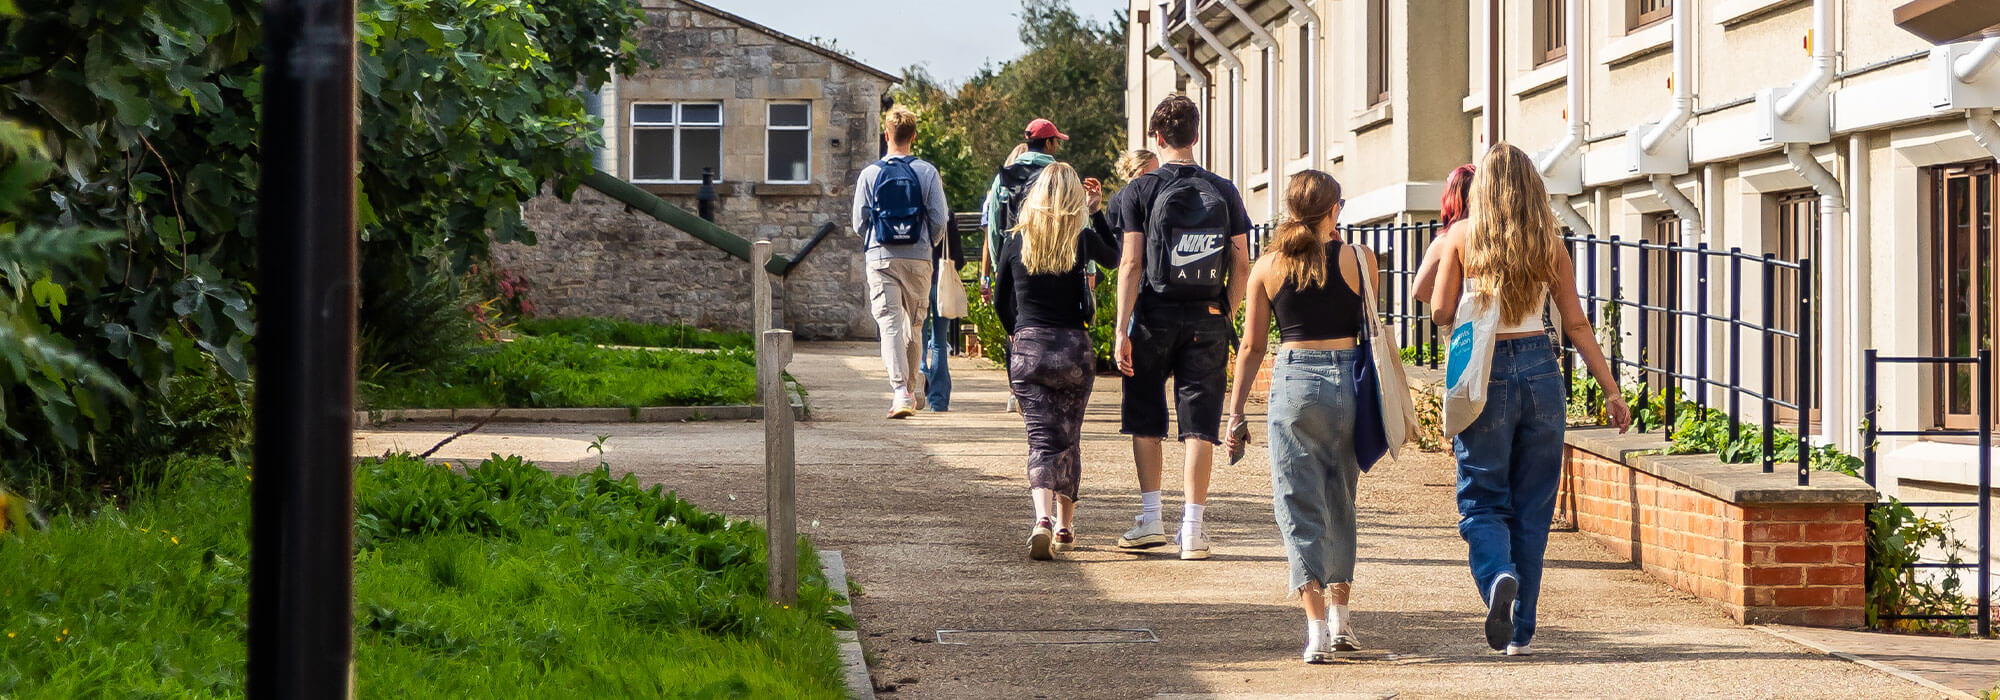 Students with their back to the camera walking near the exterior of their university accommodation